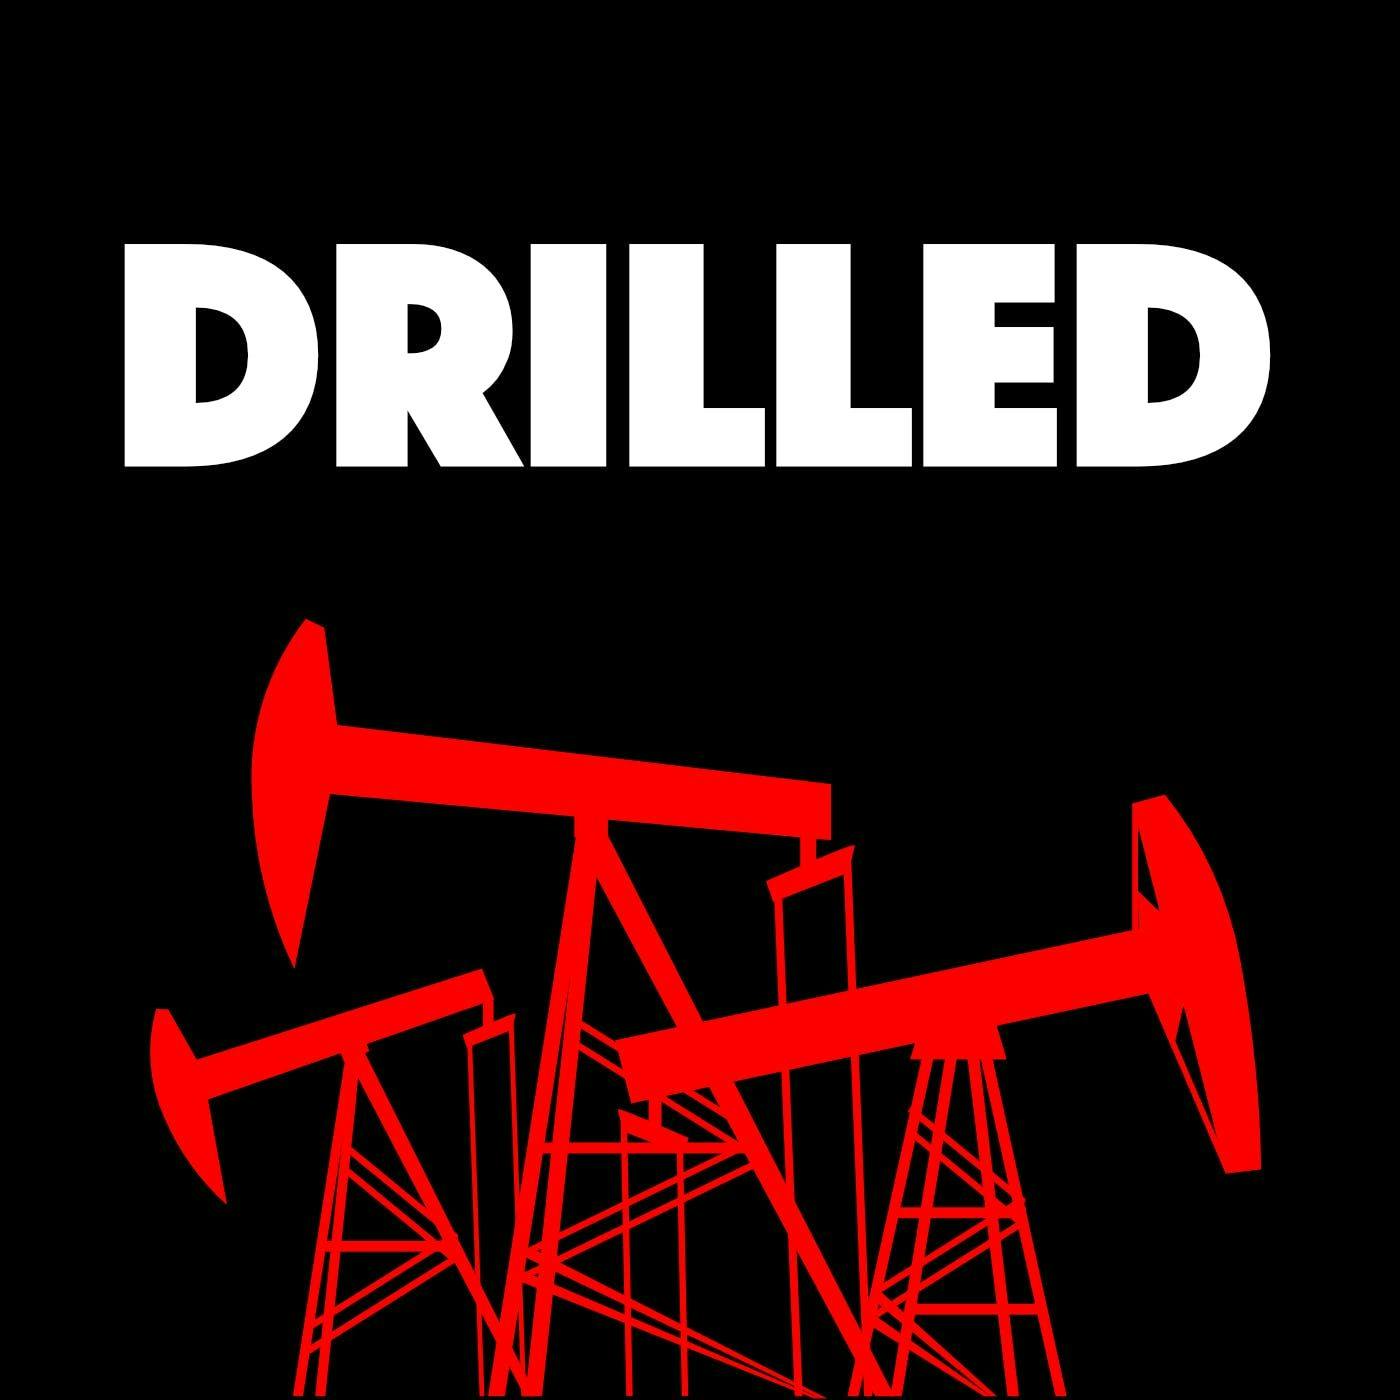 Drilled: A True Crime Podcast about Climate Change